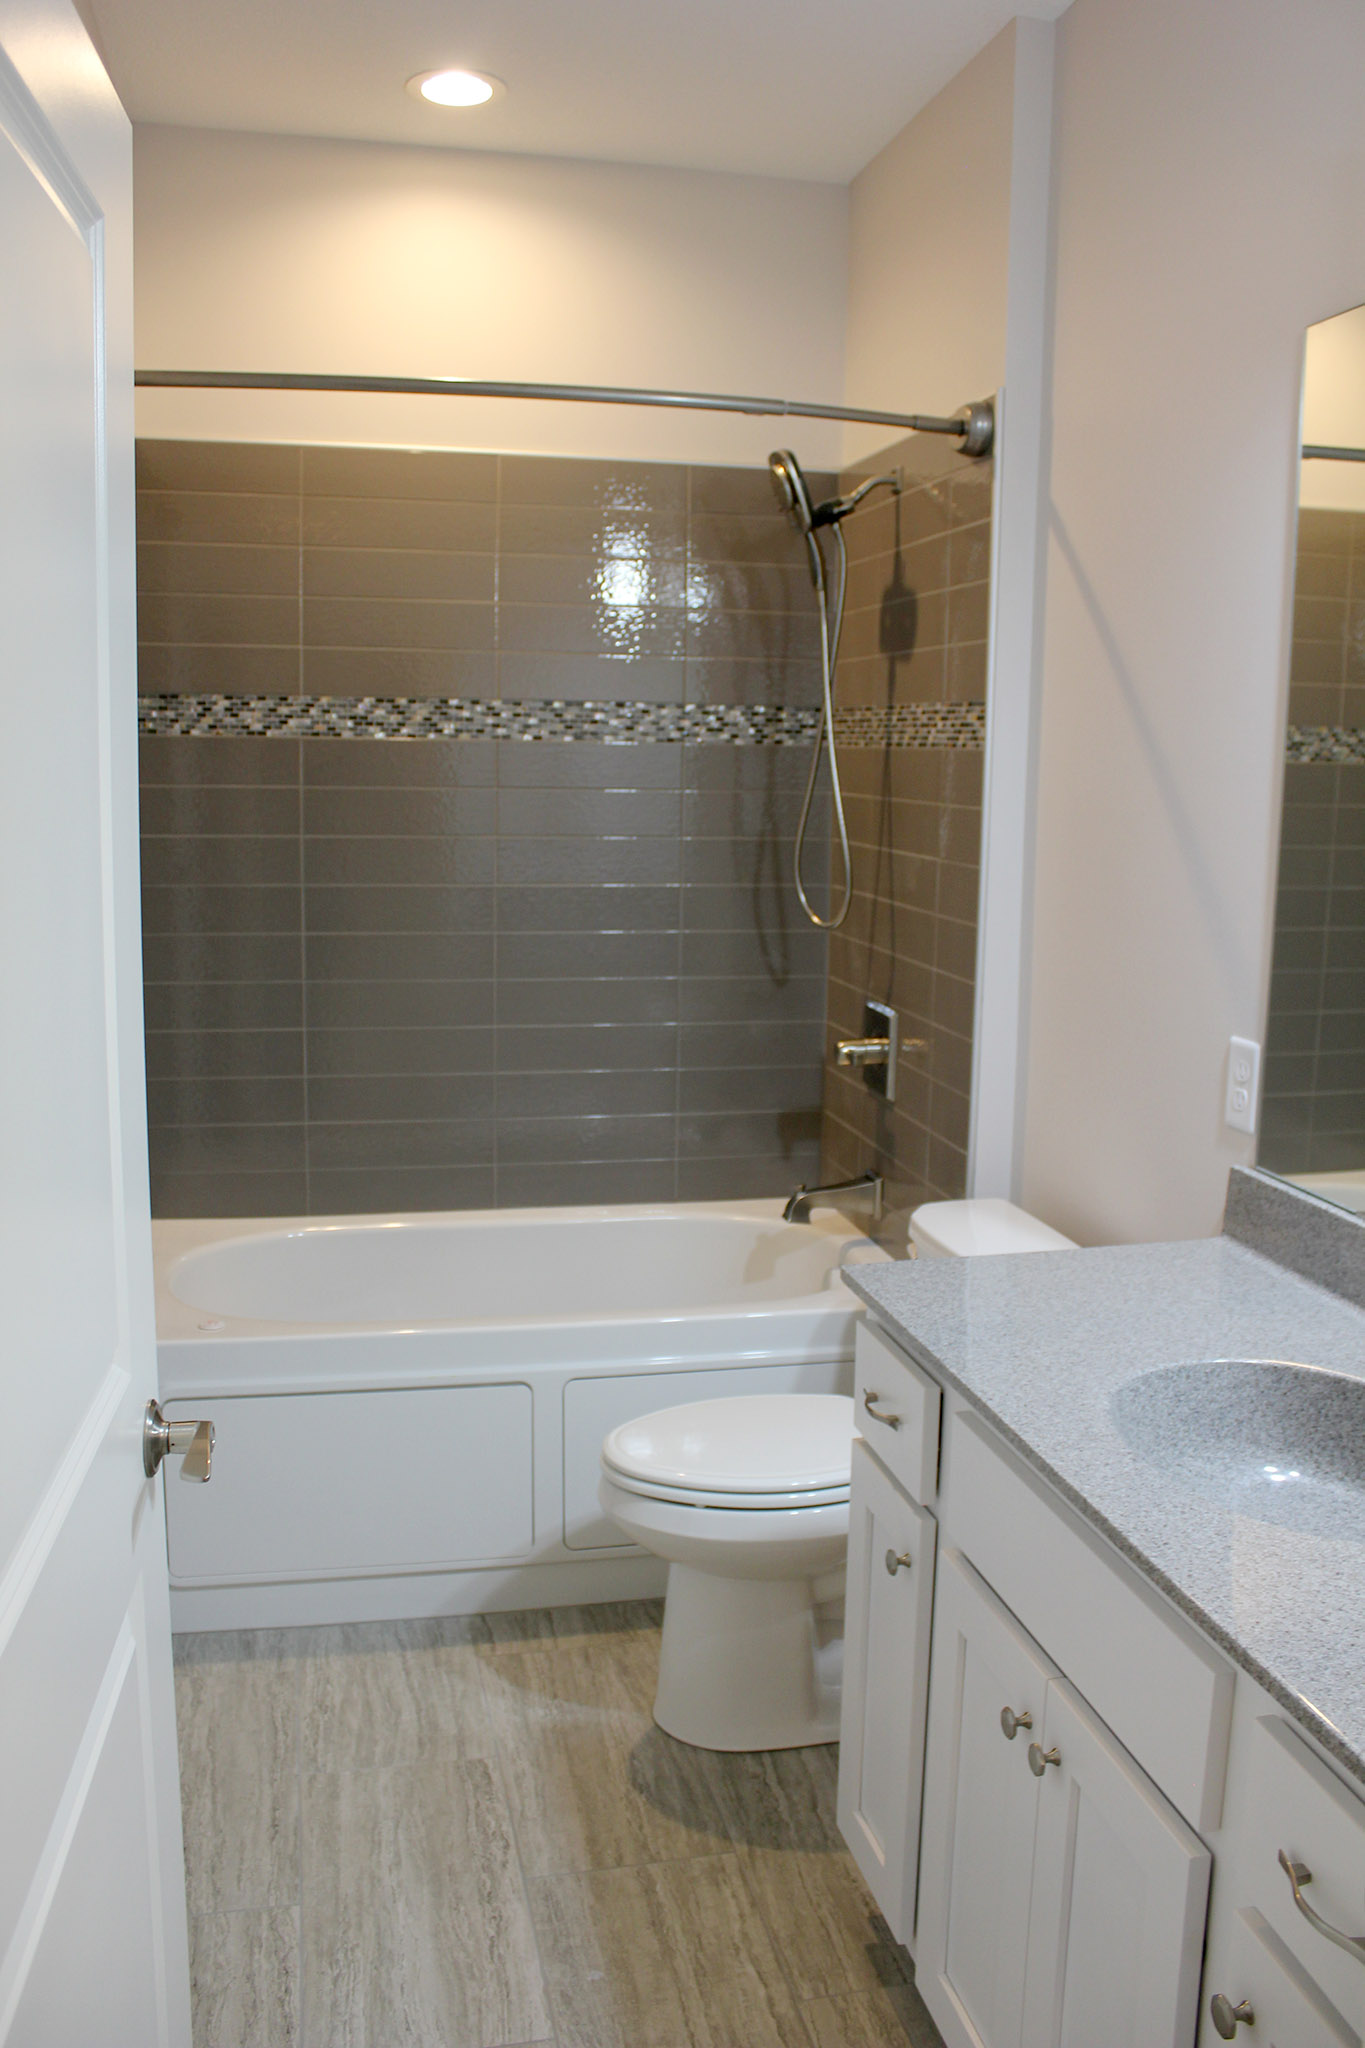 Bathroom with tile floor and shower